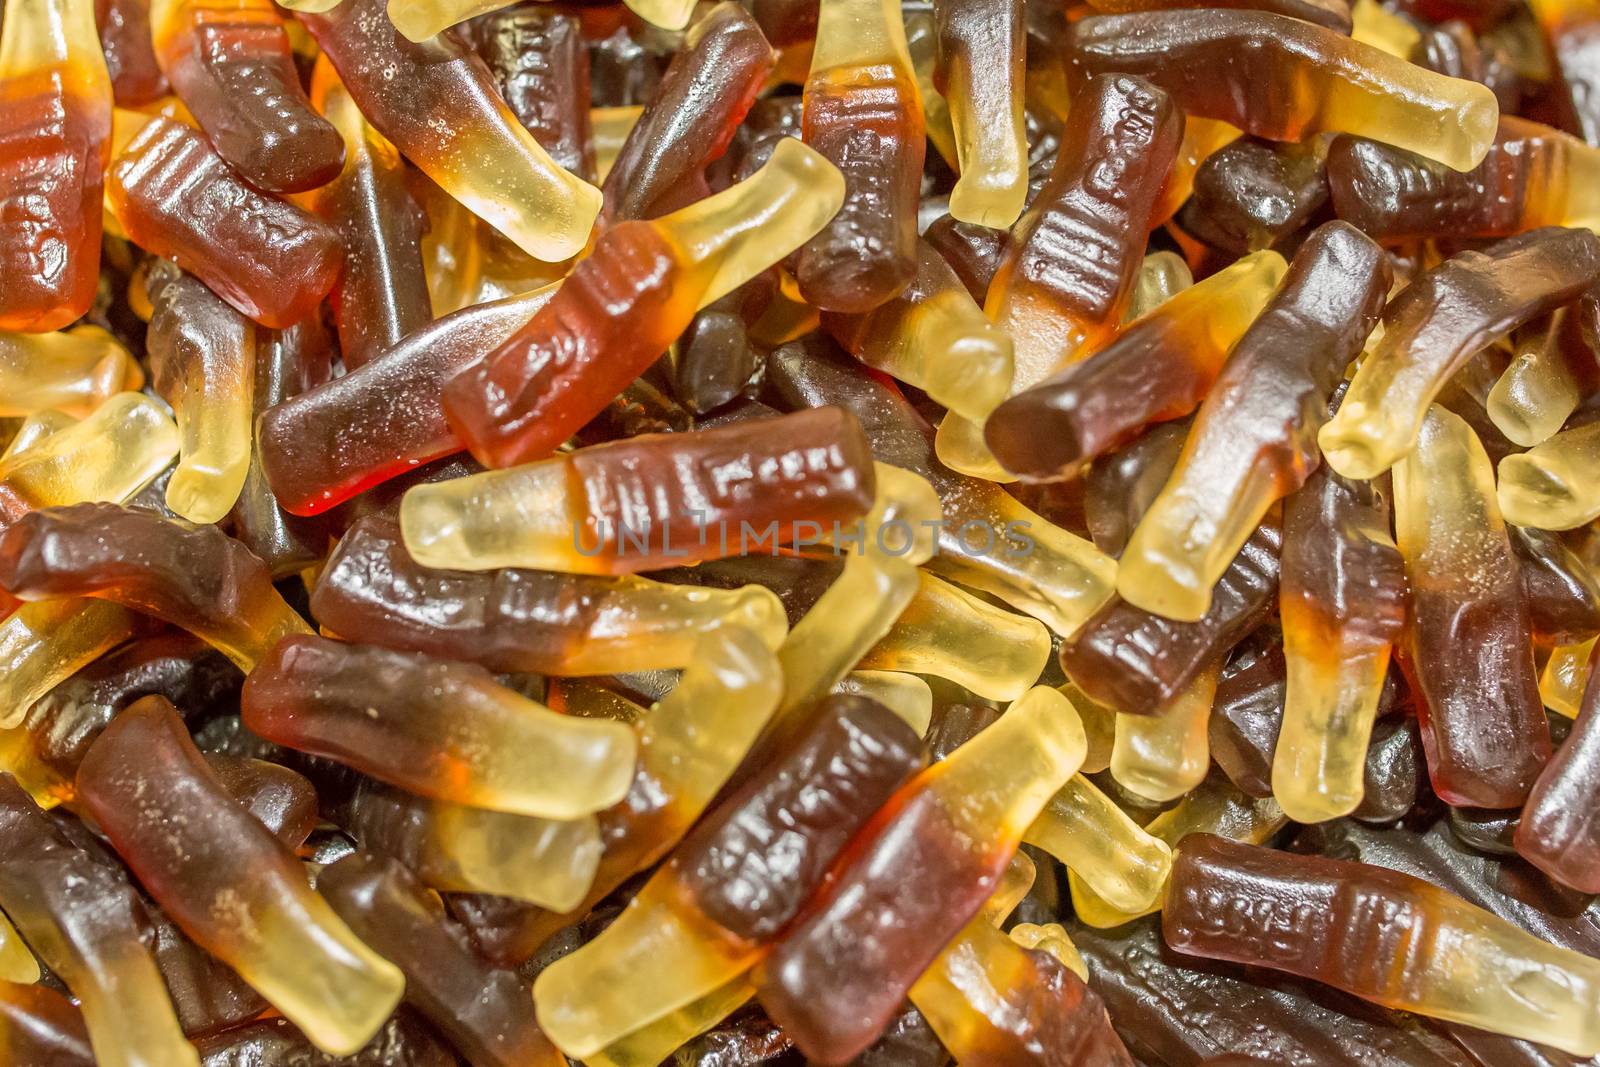 Jelly-candy texture, cola flavor, shape of cola bottles. Candy store photo.